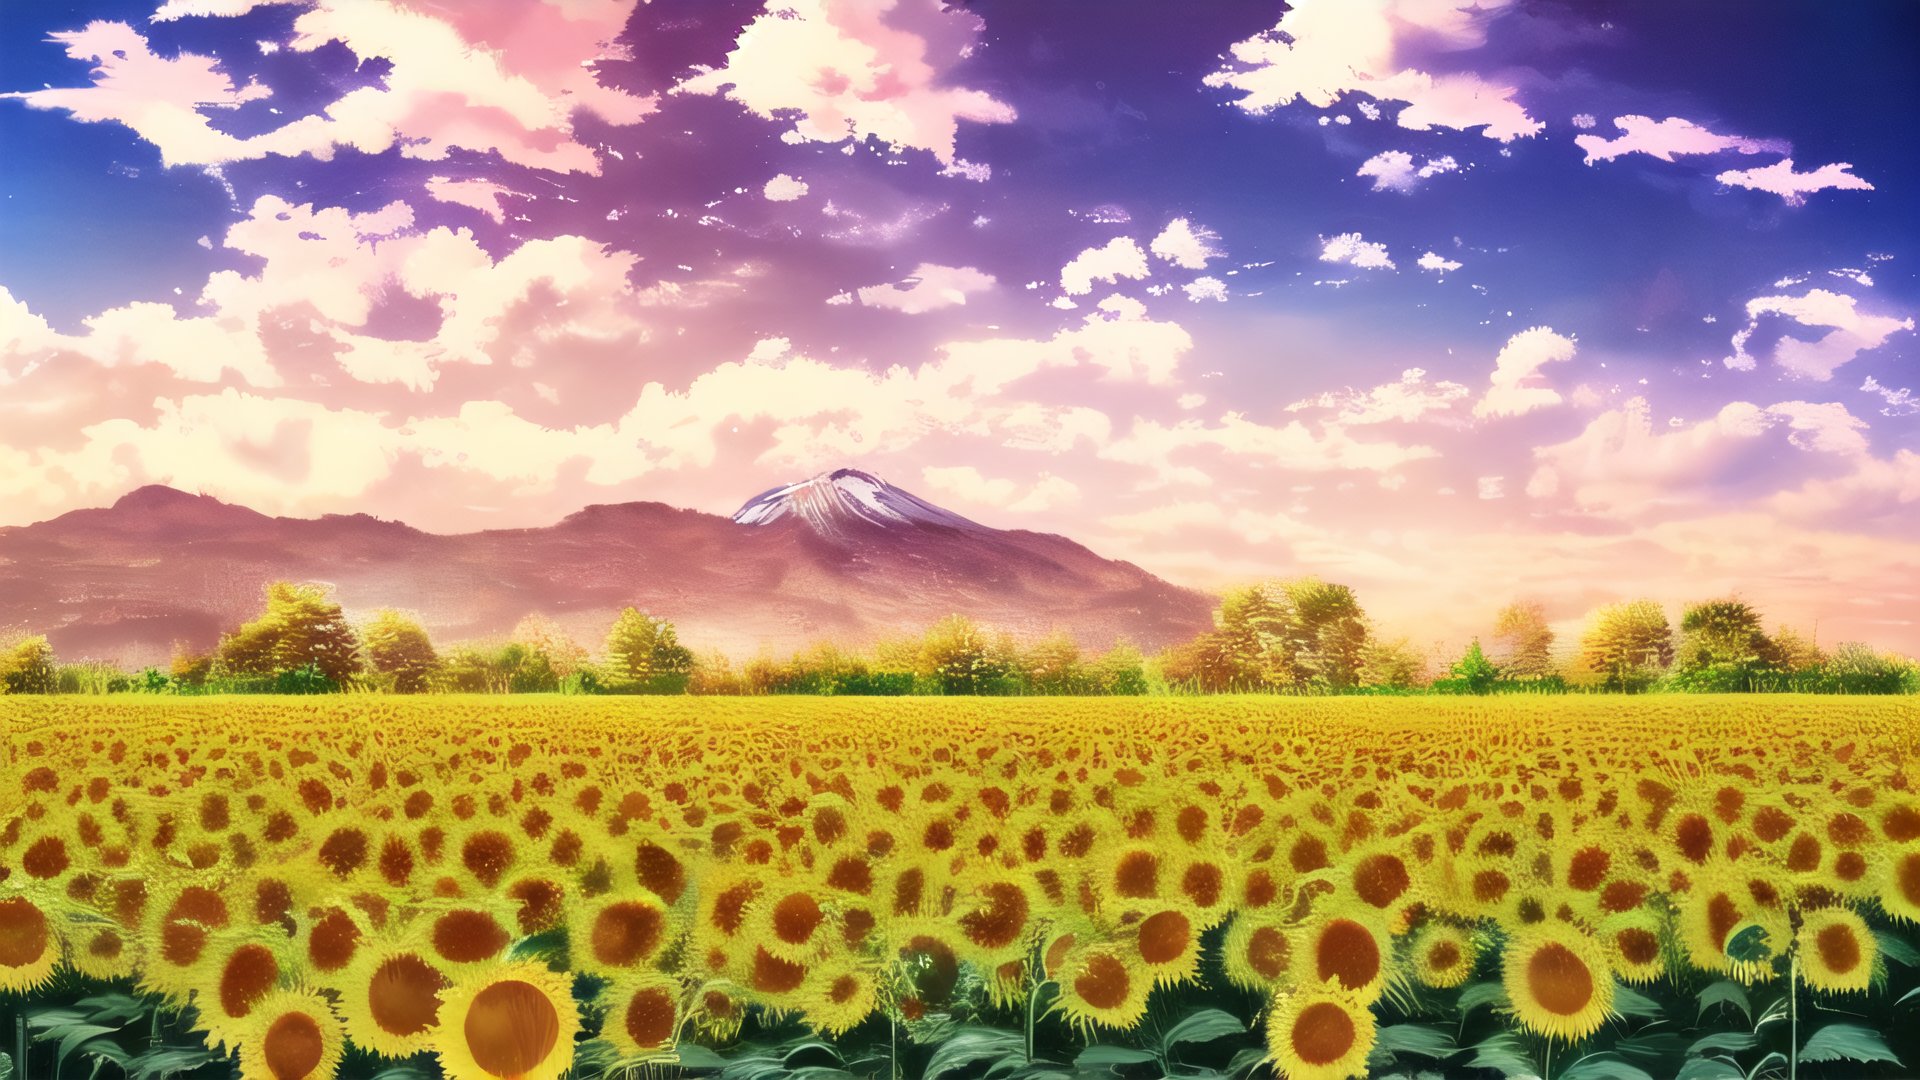 field of golden sunflowers bathed by sunrise rays, sky beautiful with cloud, bees flying around (high definition, japanese anime style)